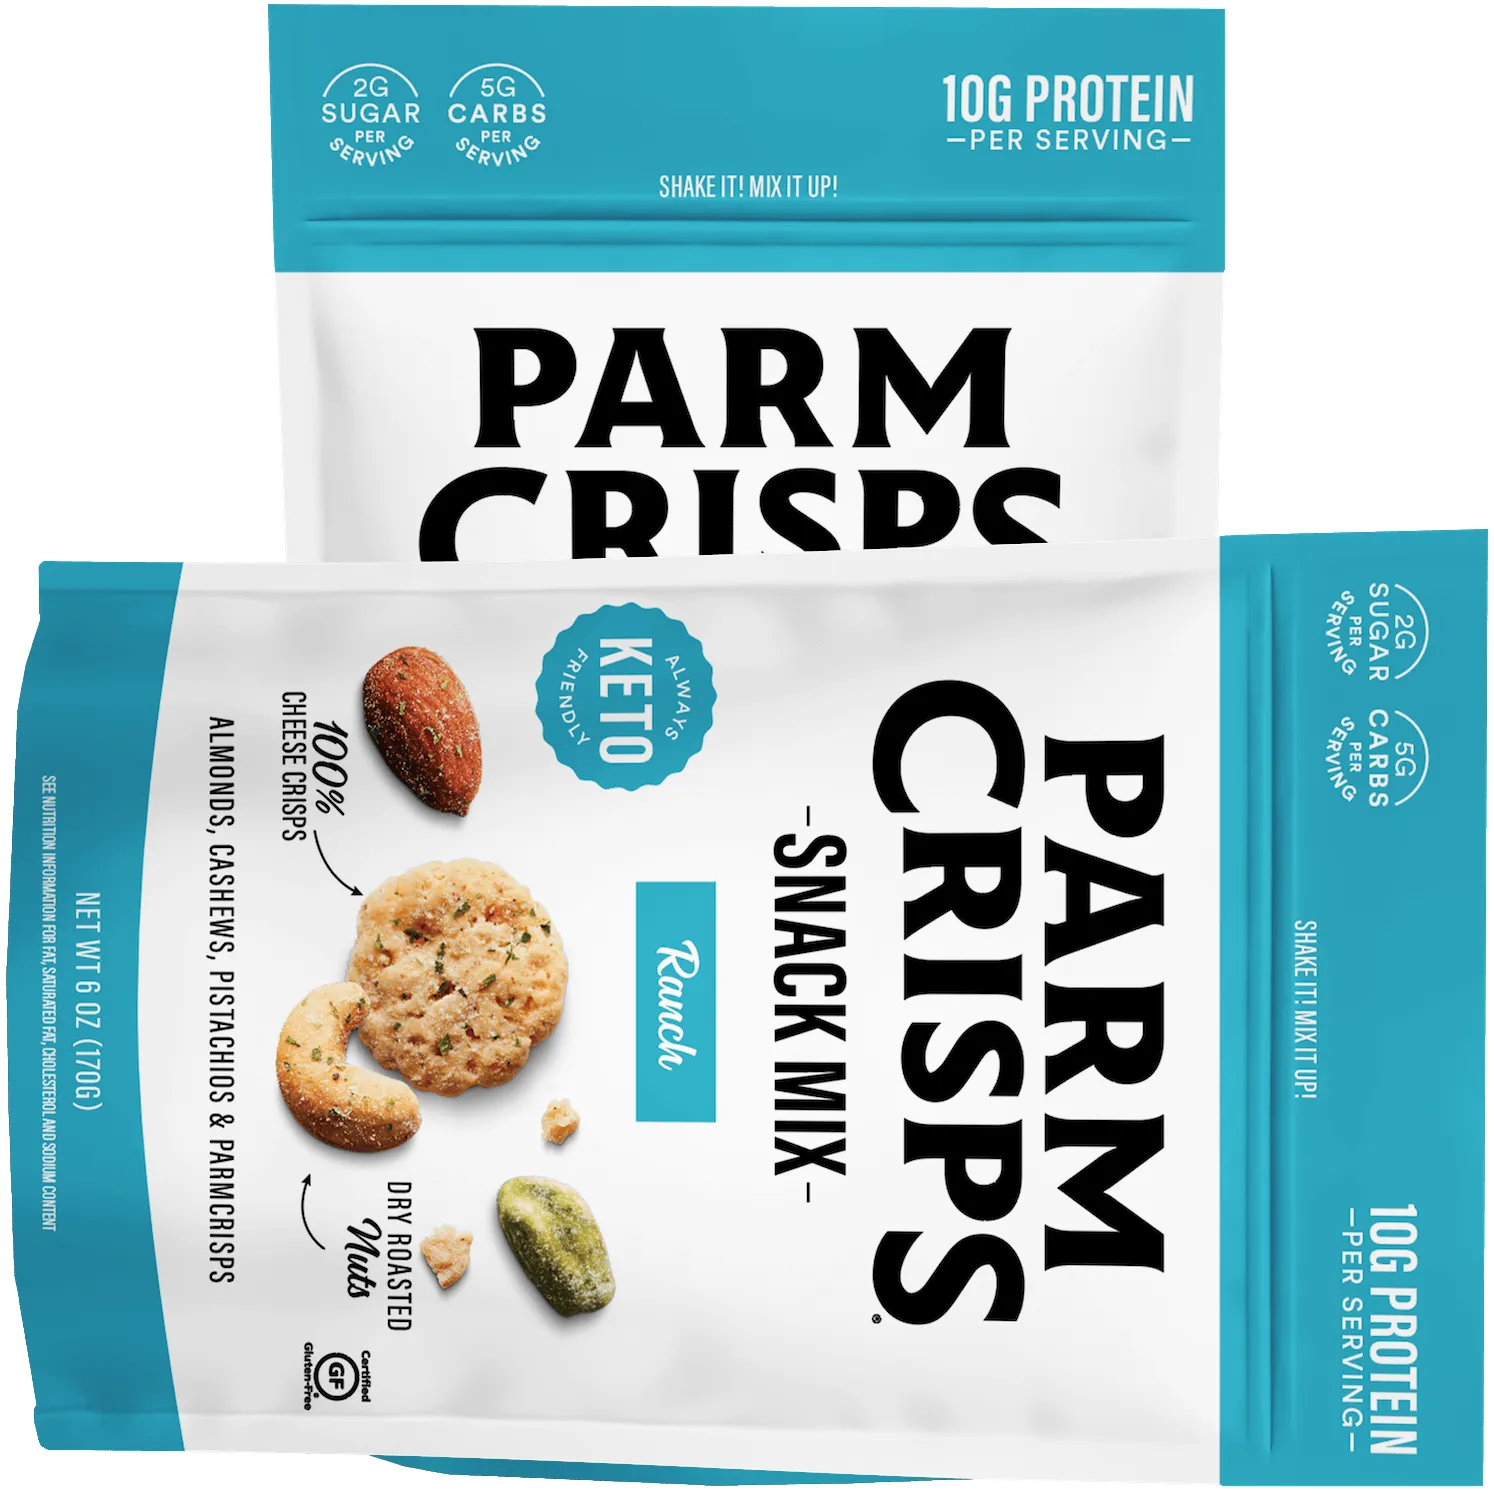 Free Parmcrisps Ranch Flavored Snack Mix